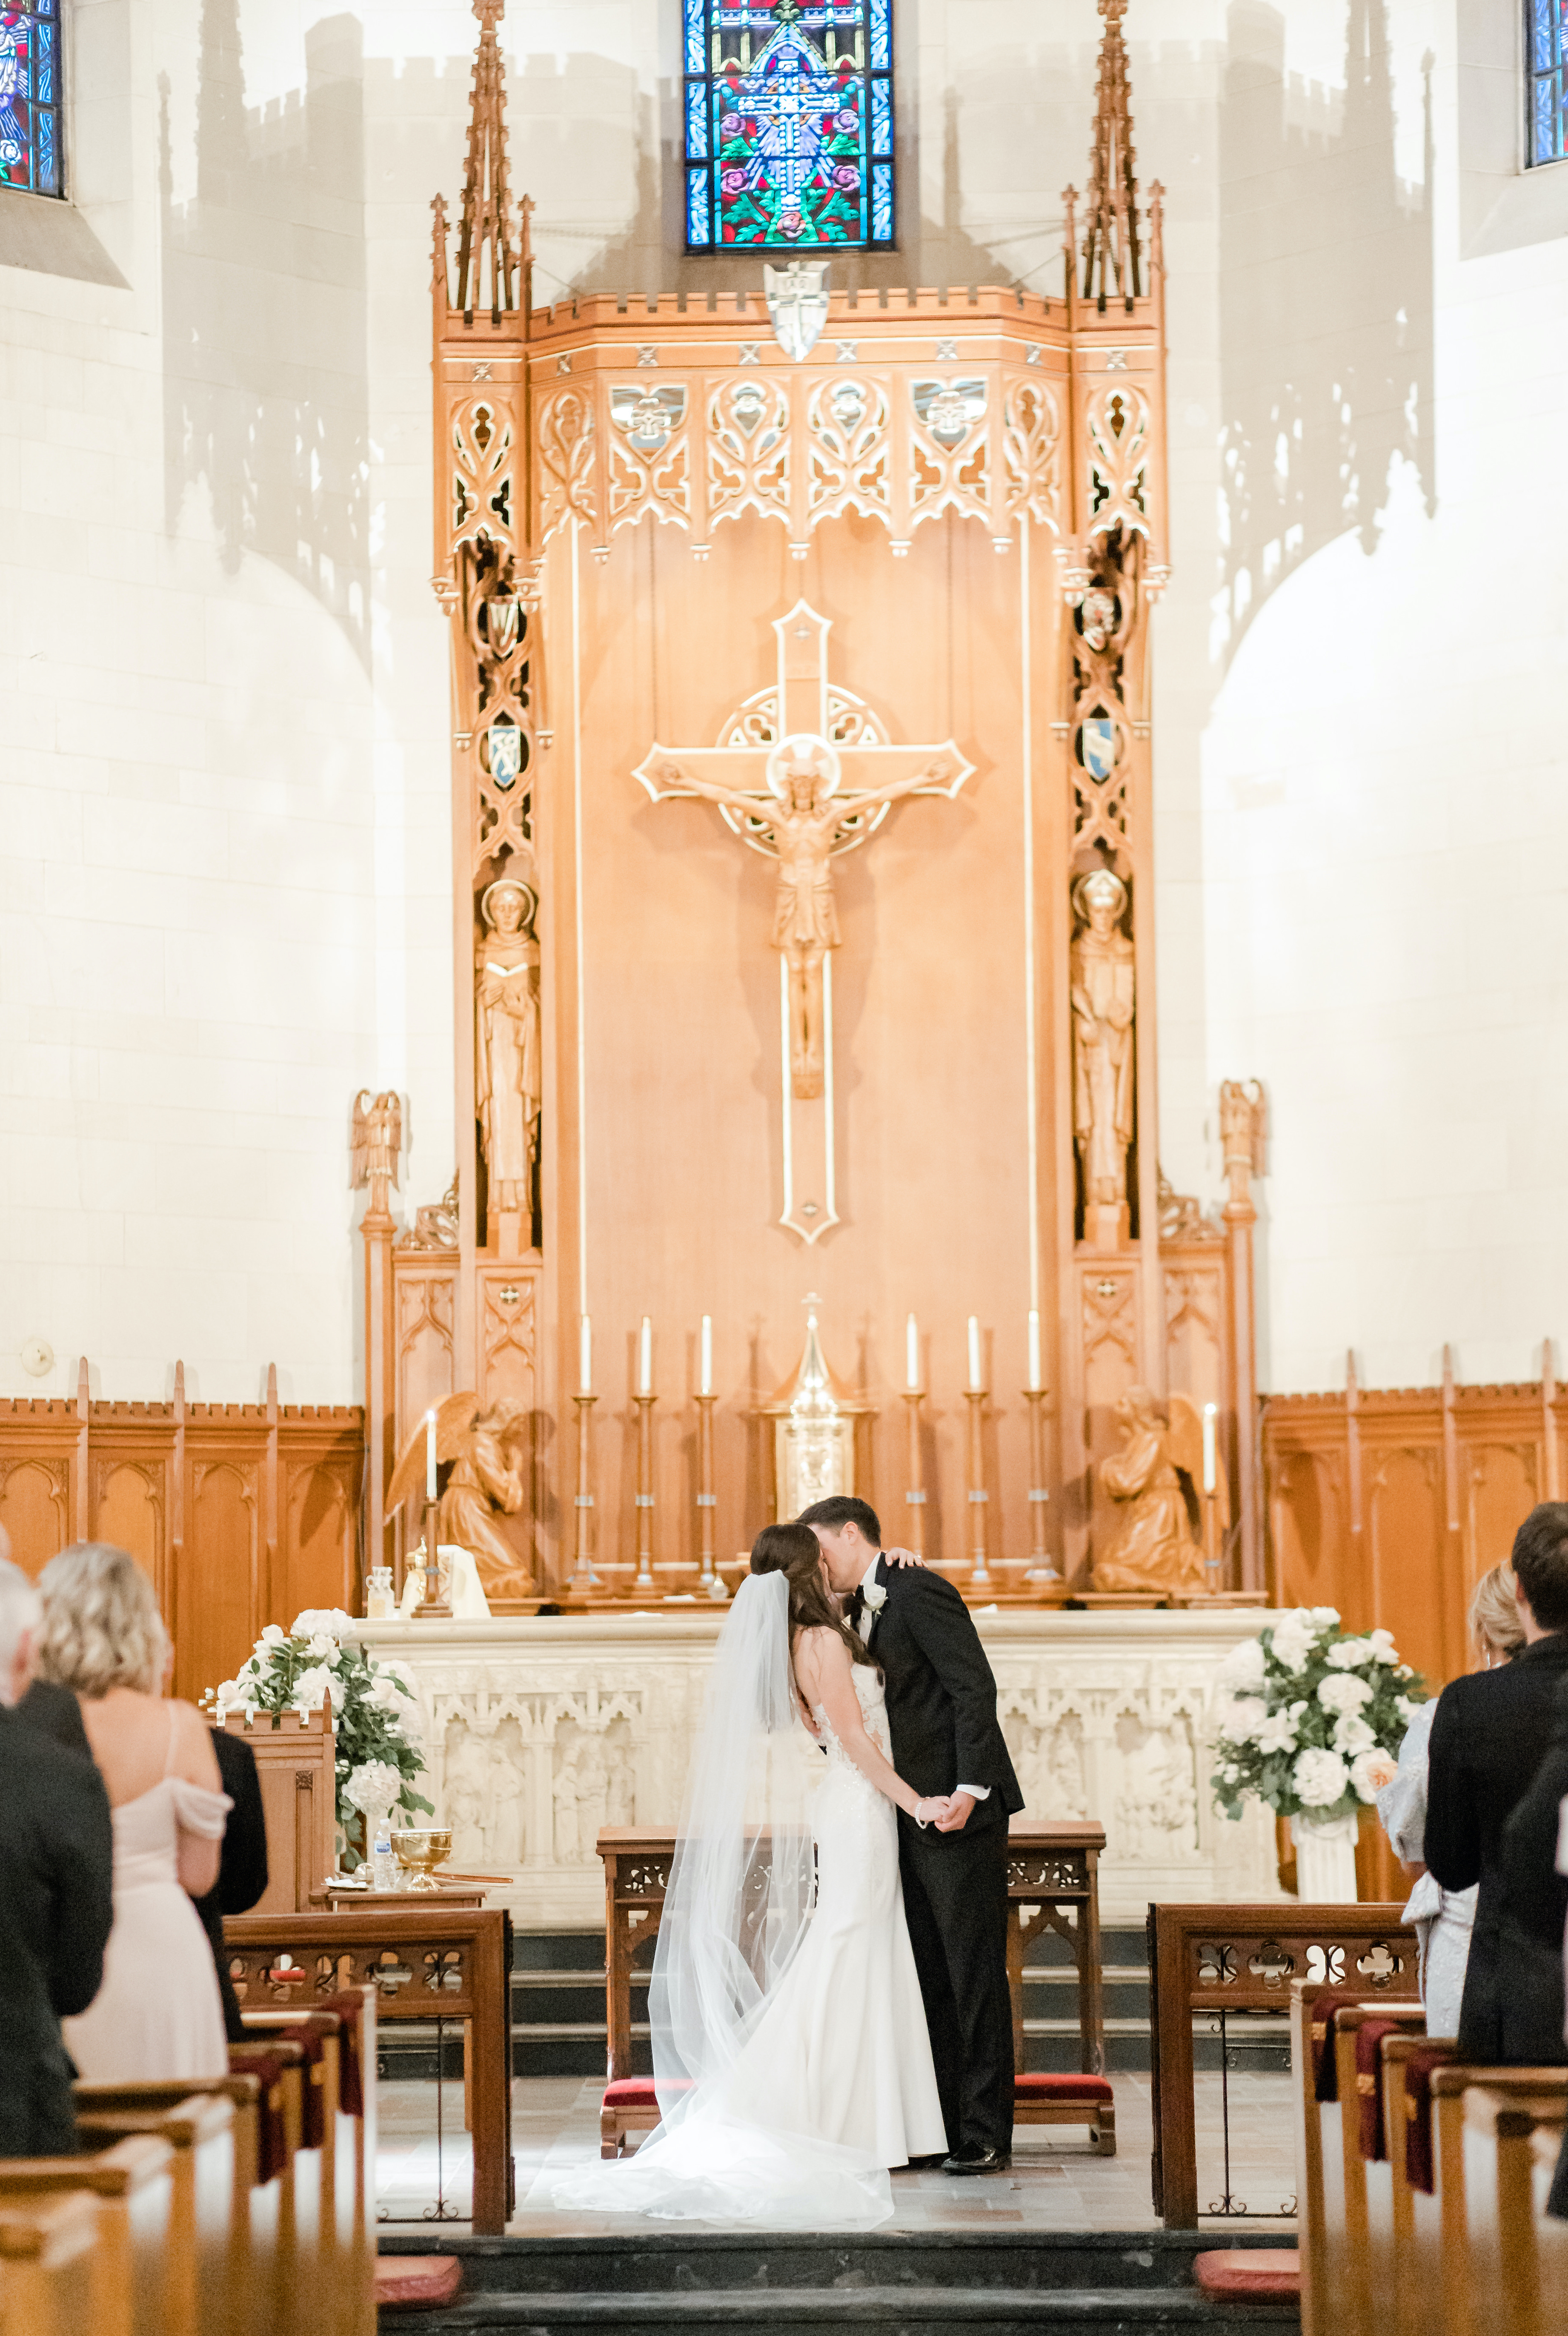 A bride and groom kiss at the altar during their wedding in Houston.